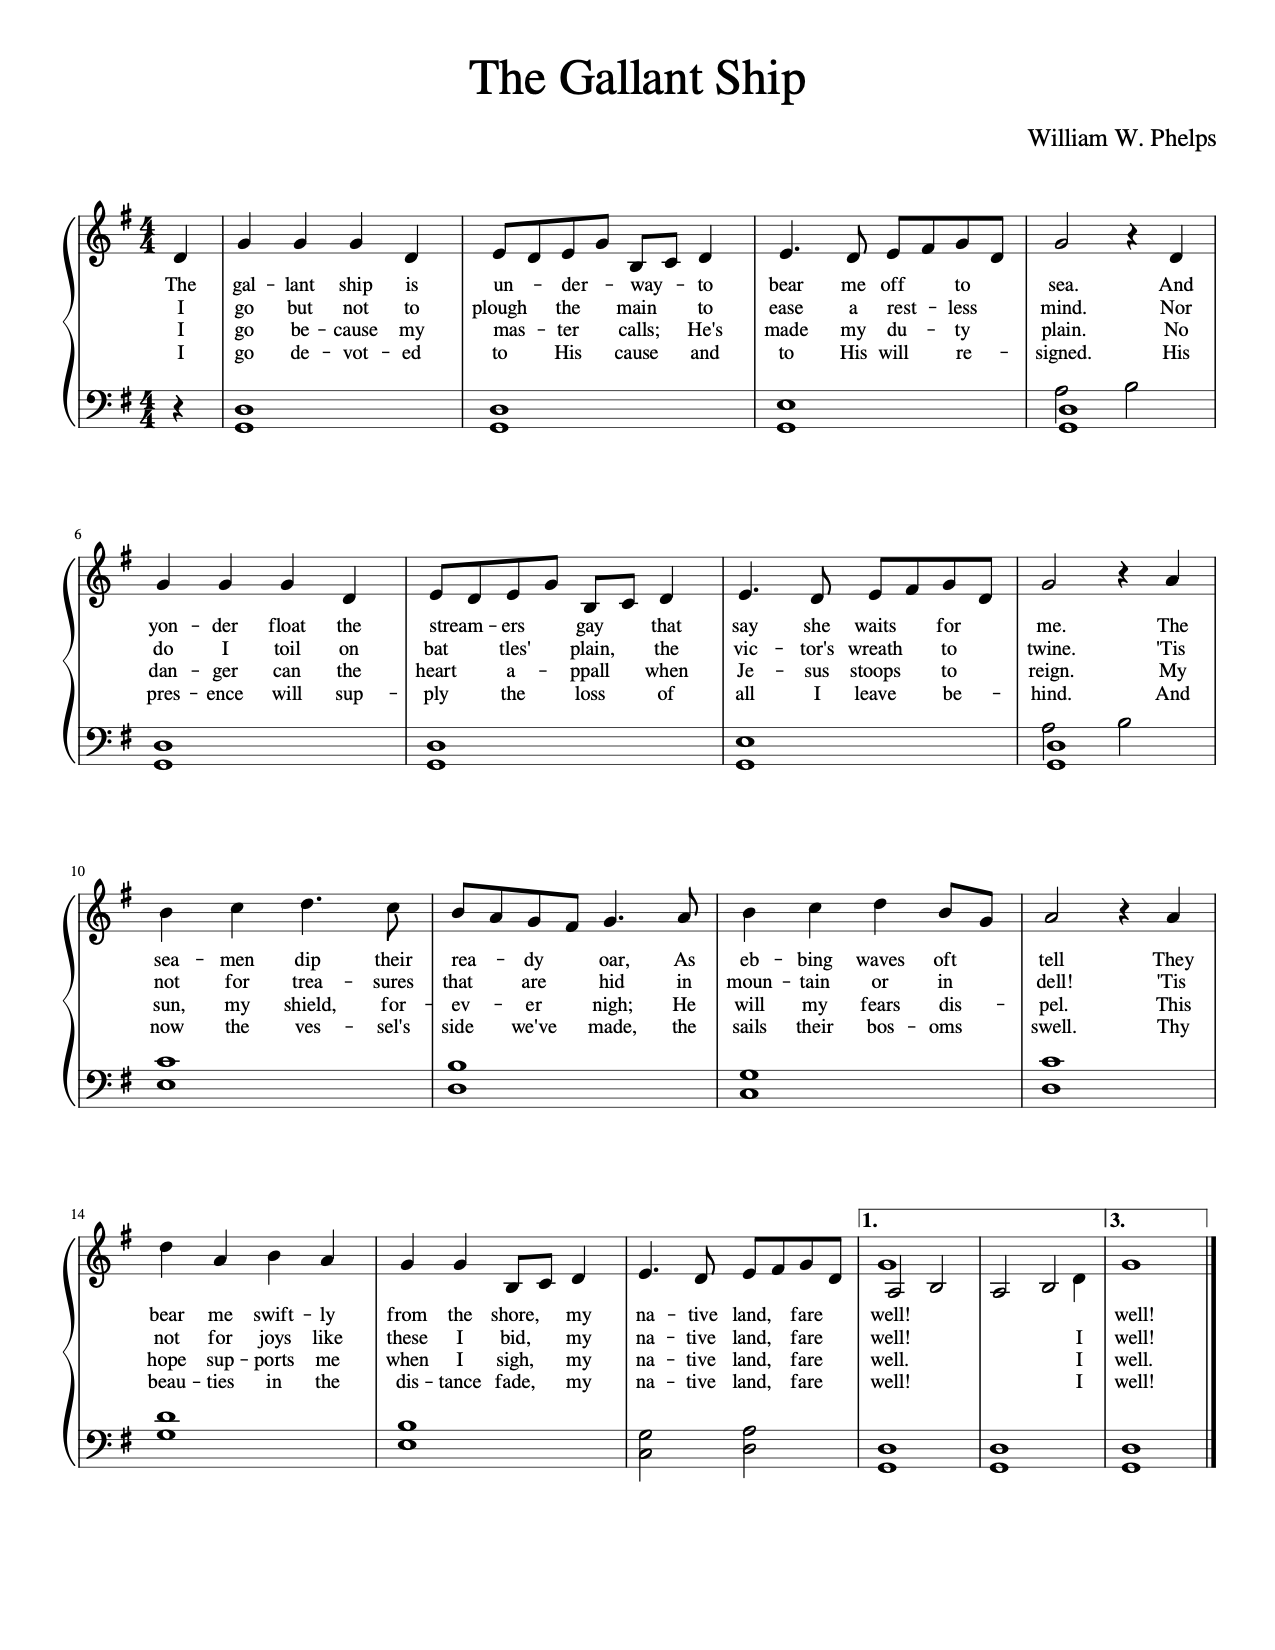 a pdf of a sheet of music for the song "The Gallant Ship"